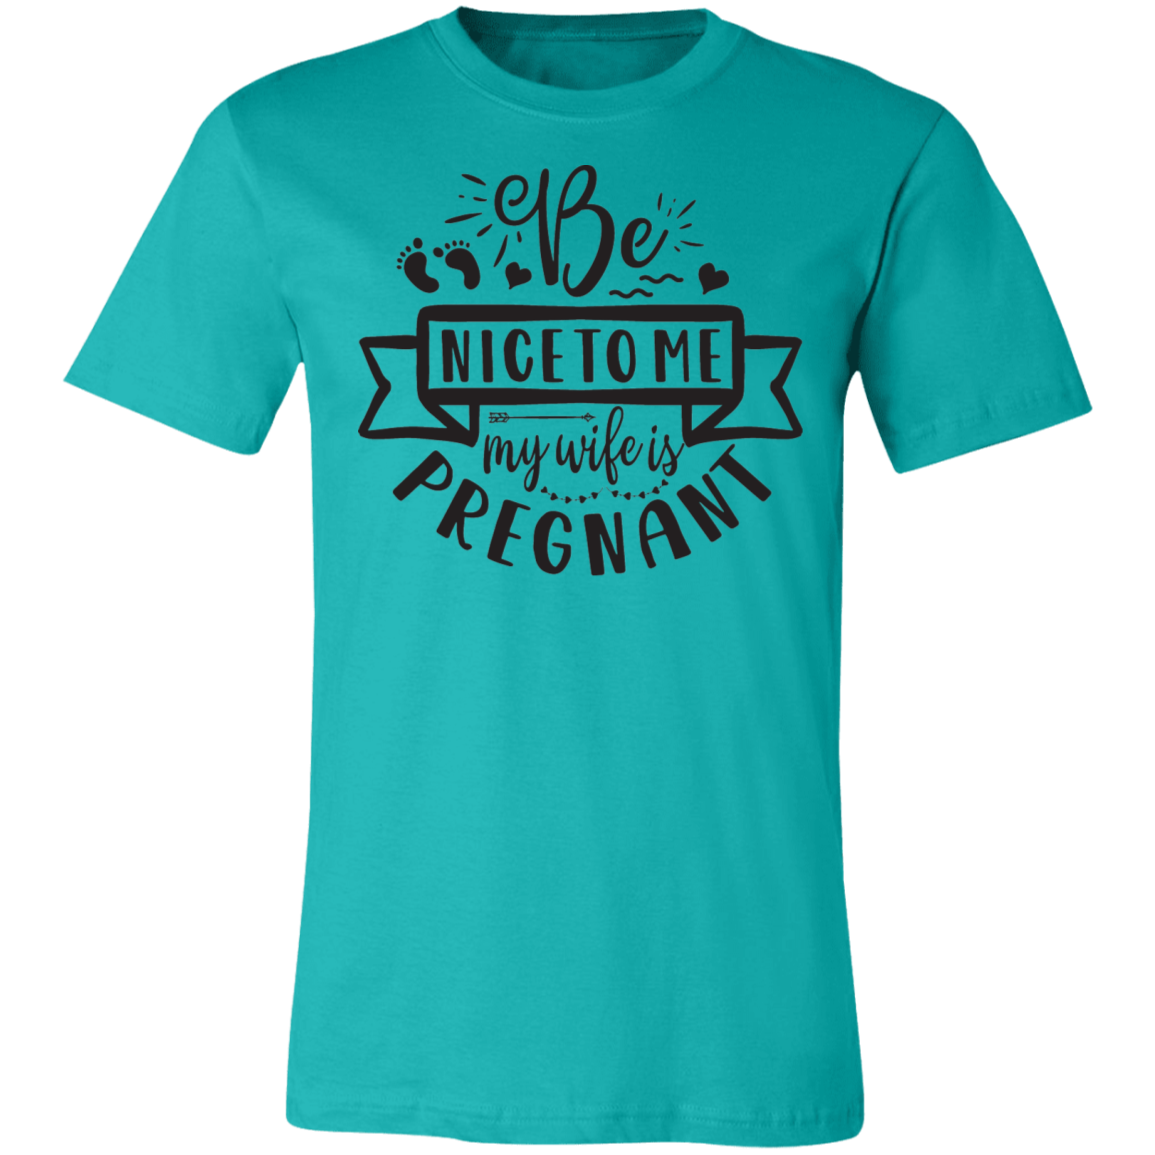 My Wife is Pregnant Tee